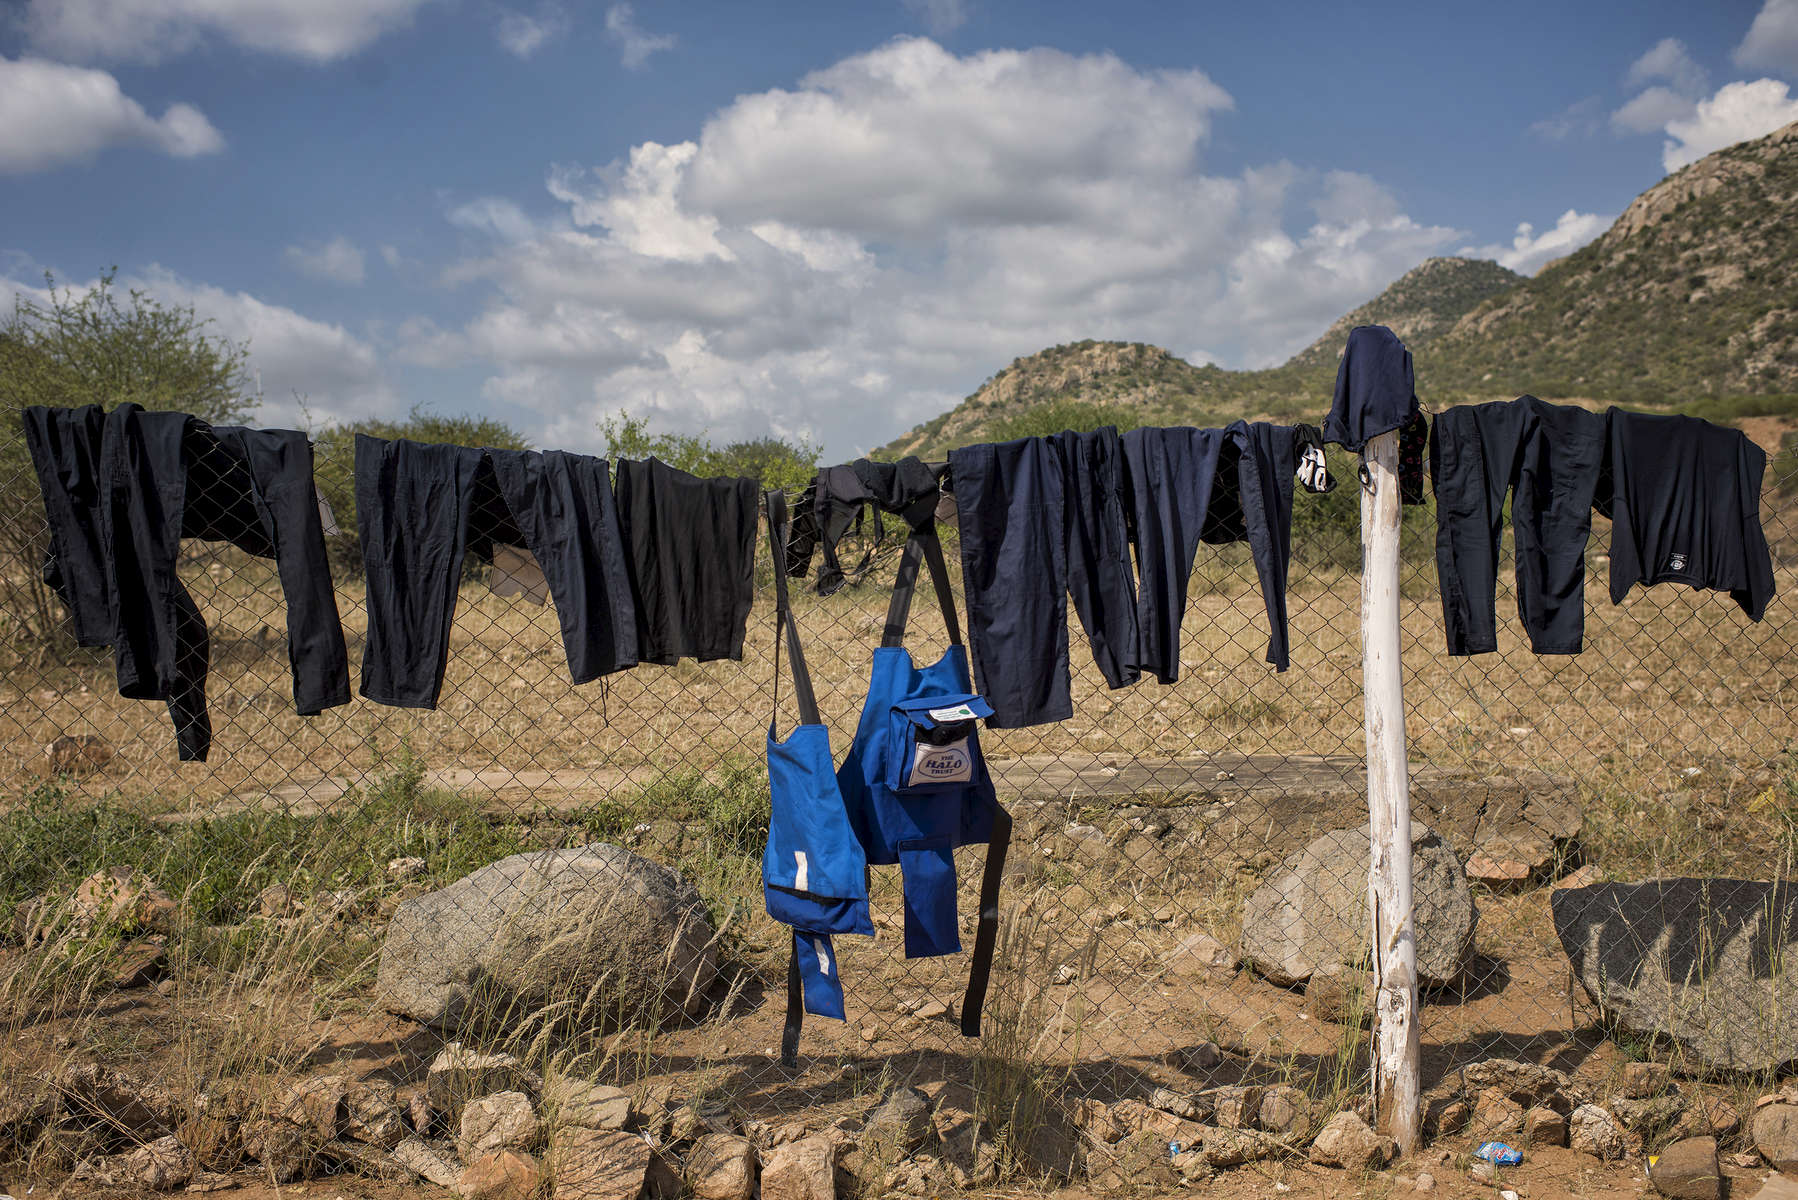 May 5, 2018: KANENGUERERE, ANGOLA - Clean HALO uniforms and body armor hang from the perimeter fence to dry at the end of the working week.  These deminers are working under extremely difficult circumstances in Kanenguerere.  Not only is extremely hot - with snakes and scorpions common - but much of the mined area is on the side of an extremely steep hill, making every step dangerous. The area was mined during the civil war by government forces to protect the nearby railway line that can be seen in the background, as well as various troop positions. It is currently used by roughly 170 people including village residents and nomadic herders - many of whom are young children - who pass through uncleared land every day. 